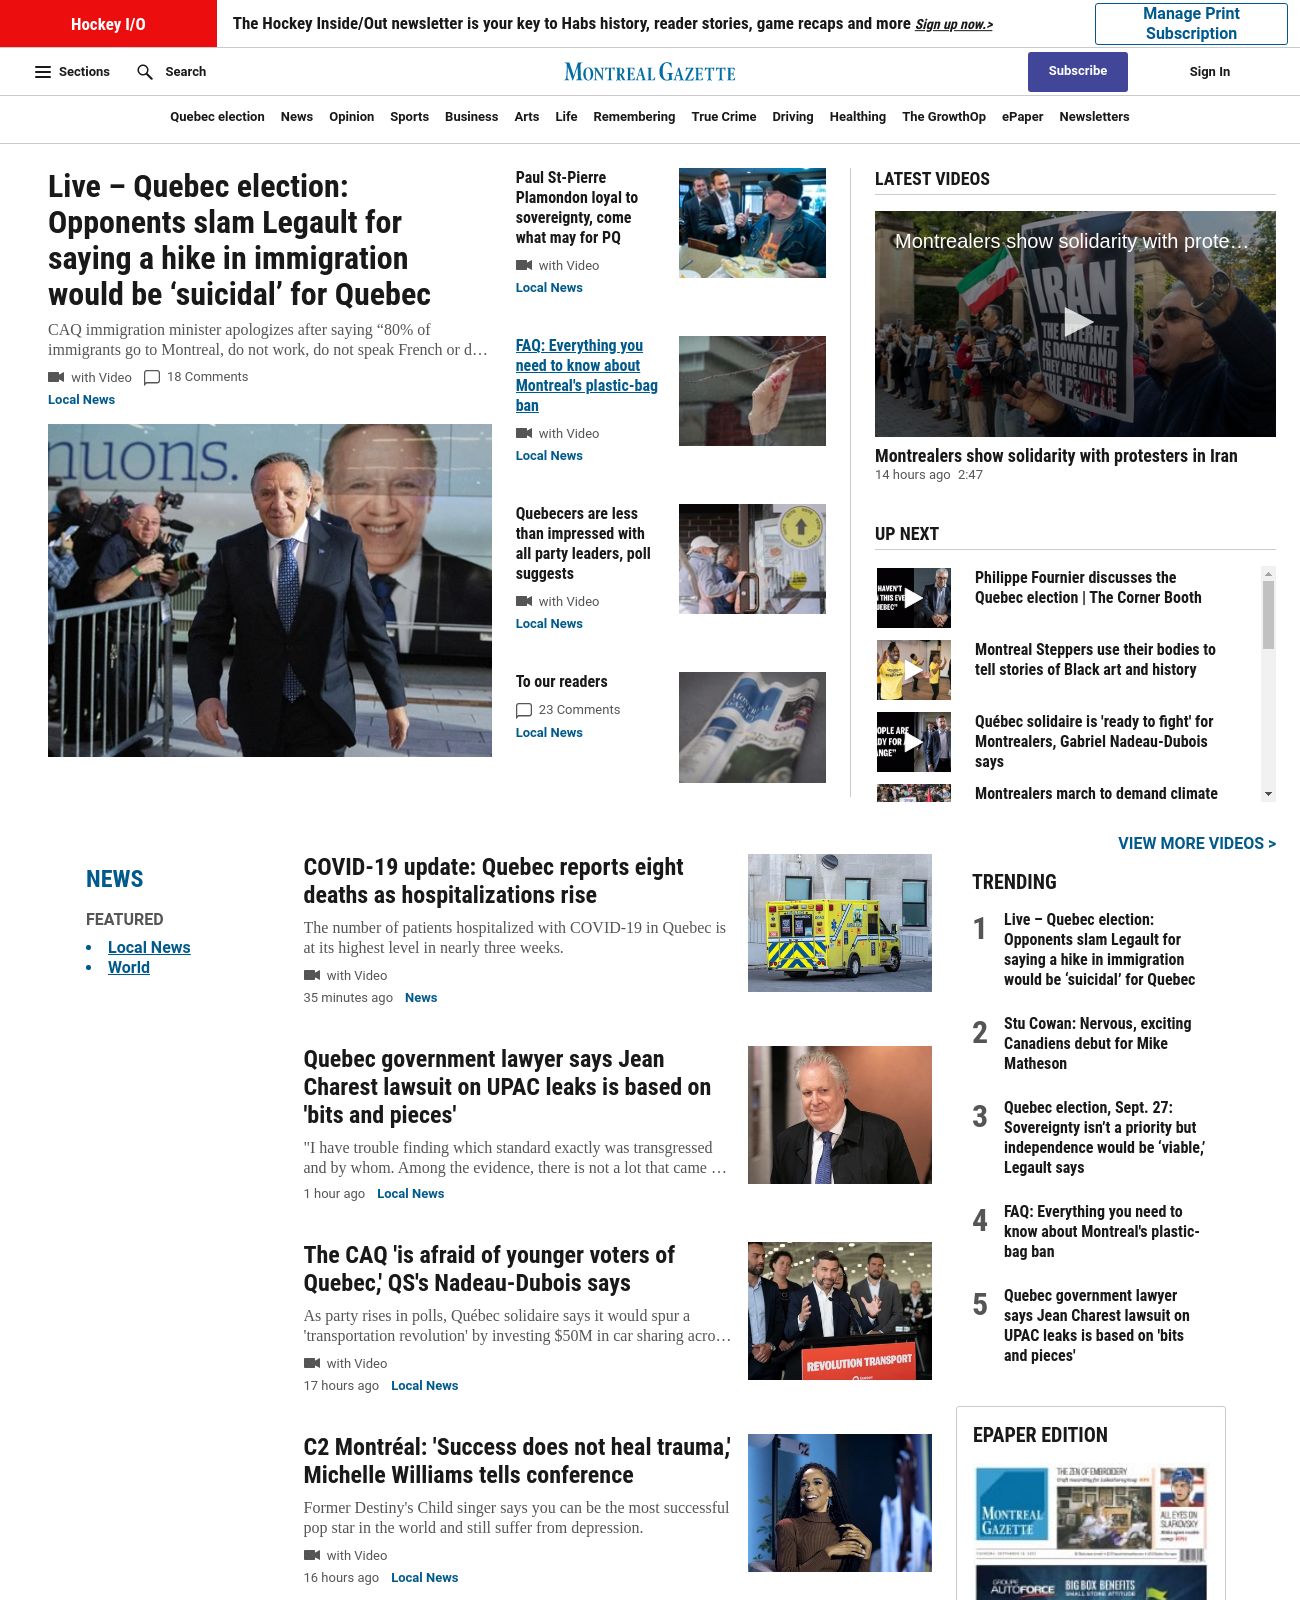 Montreal Gazette at 2022-09-28 13:44:47-04:00 local time